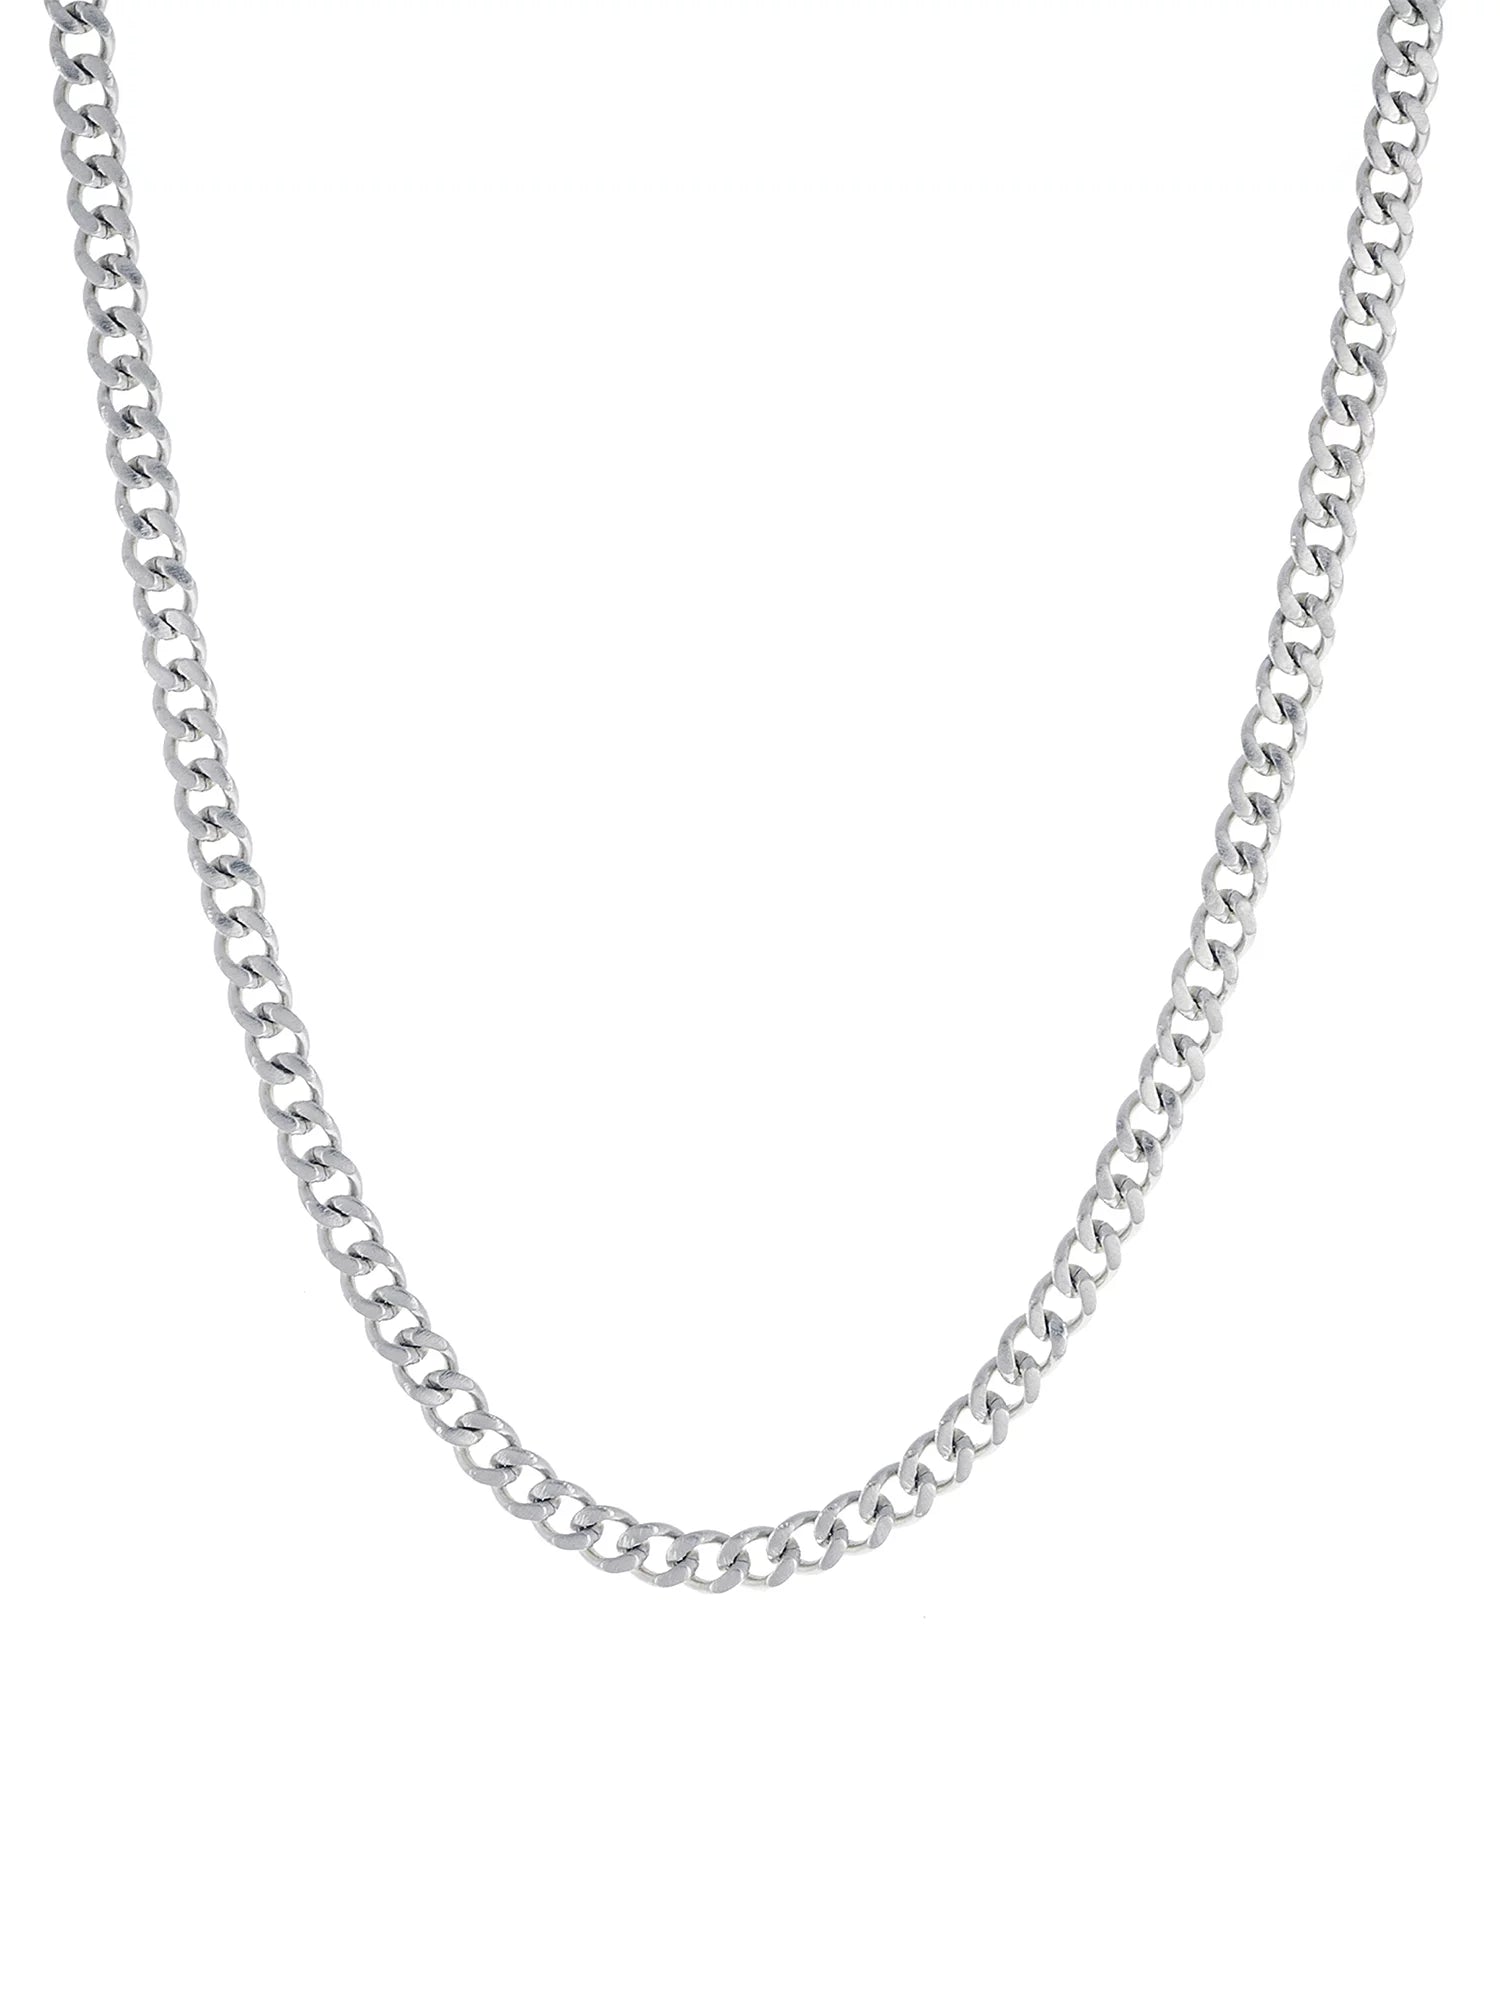 Stainless Steel 24" Cuban Chain Necklace for Men